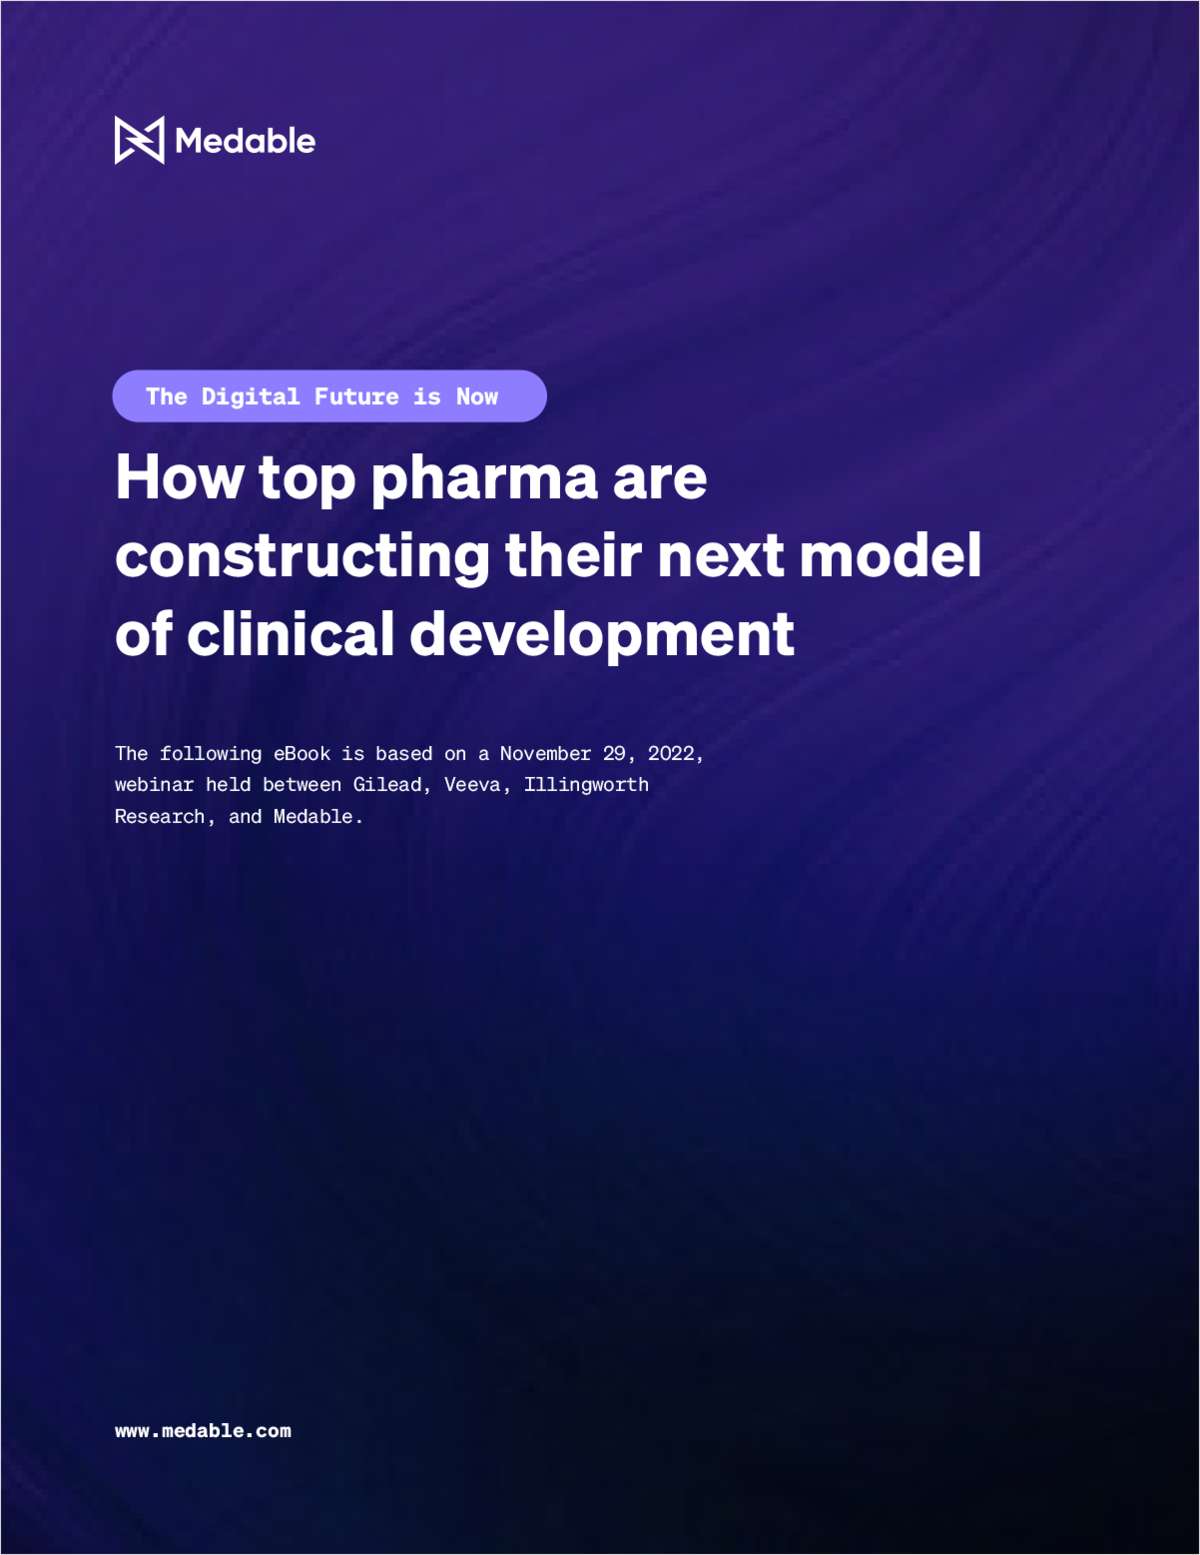 How top pharma are constructing their next model of clinical development